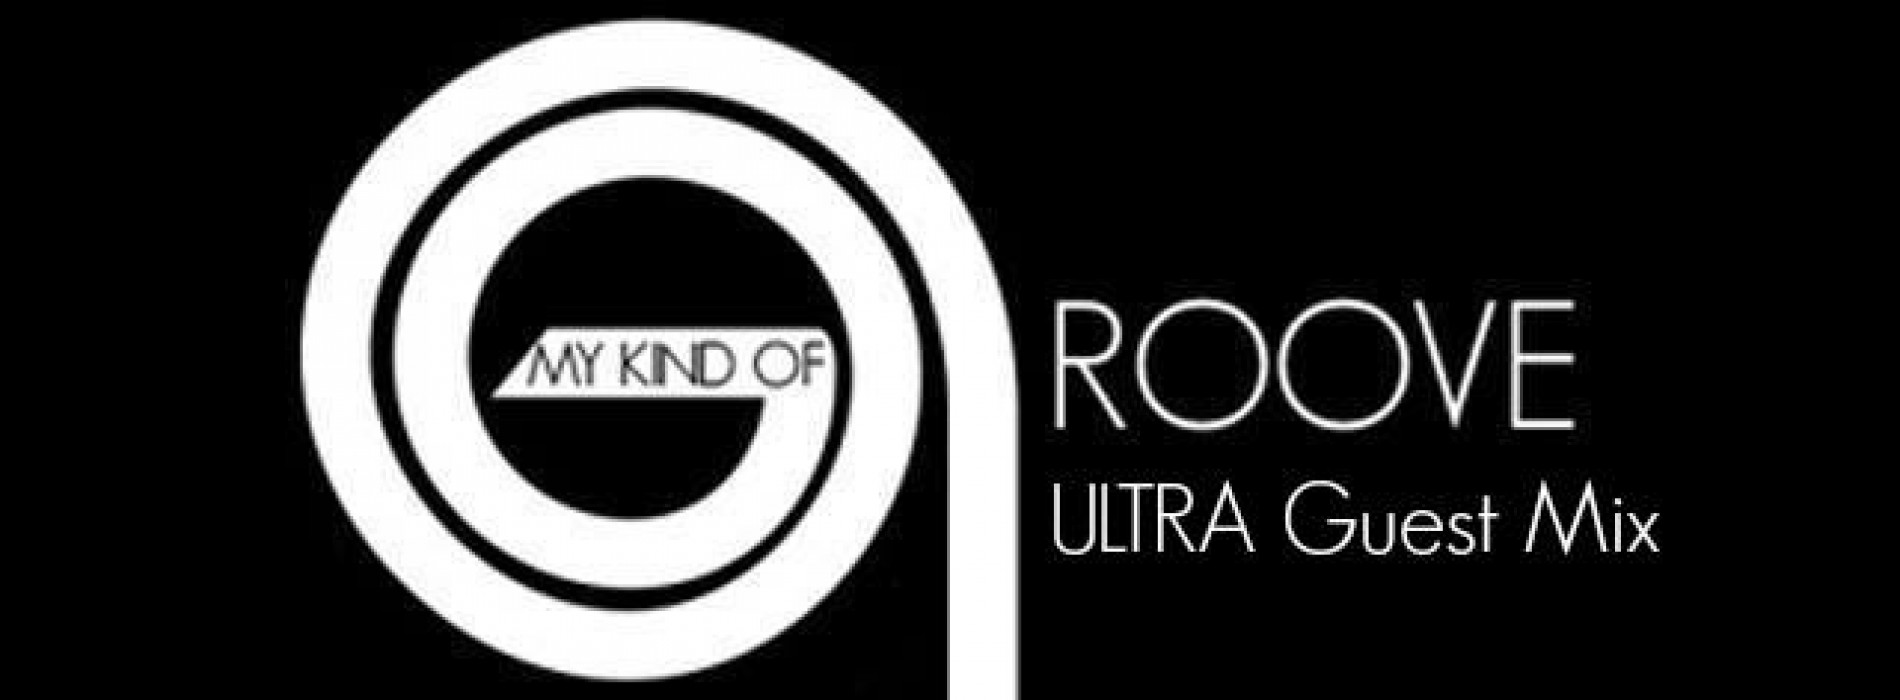 My Kind Of Groove – PodGroove #020 – Ultra Guest Mix